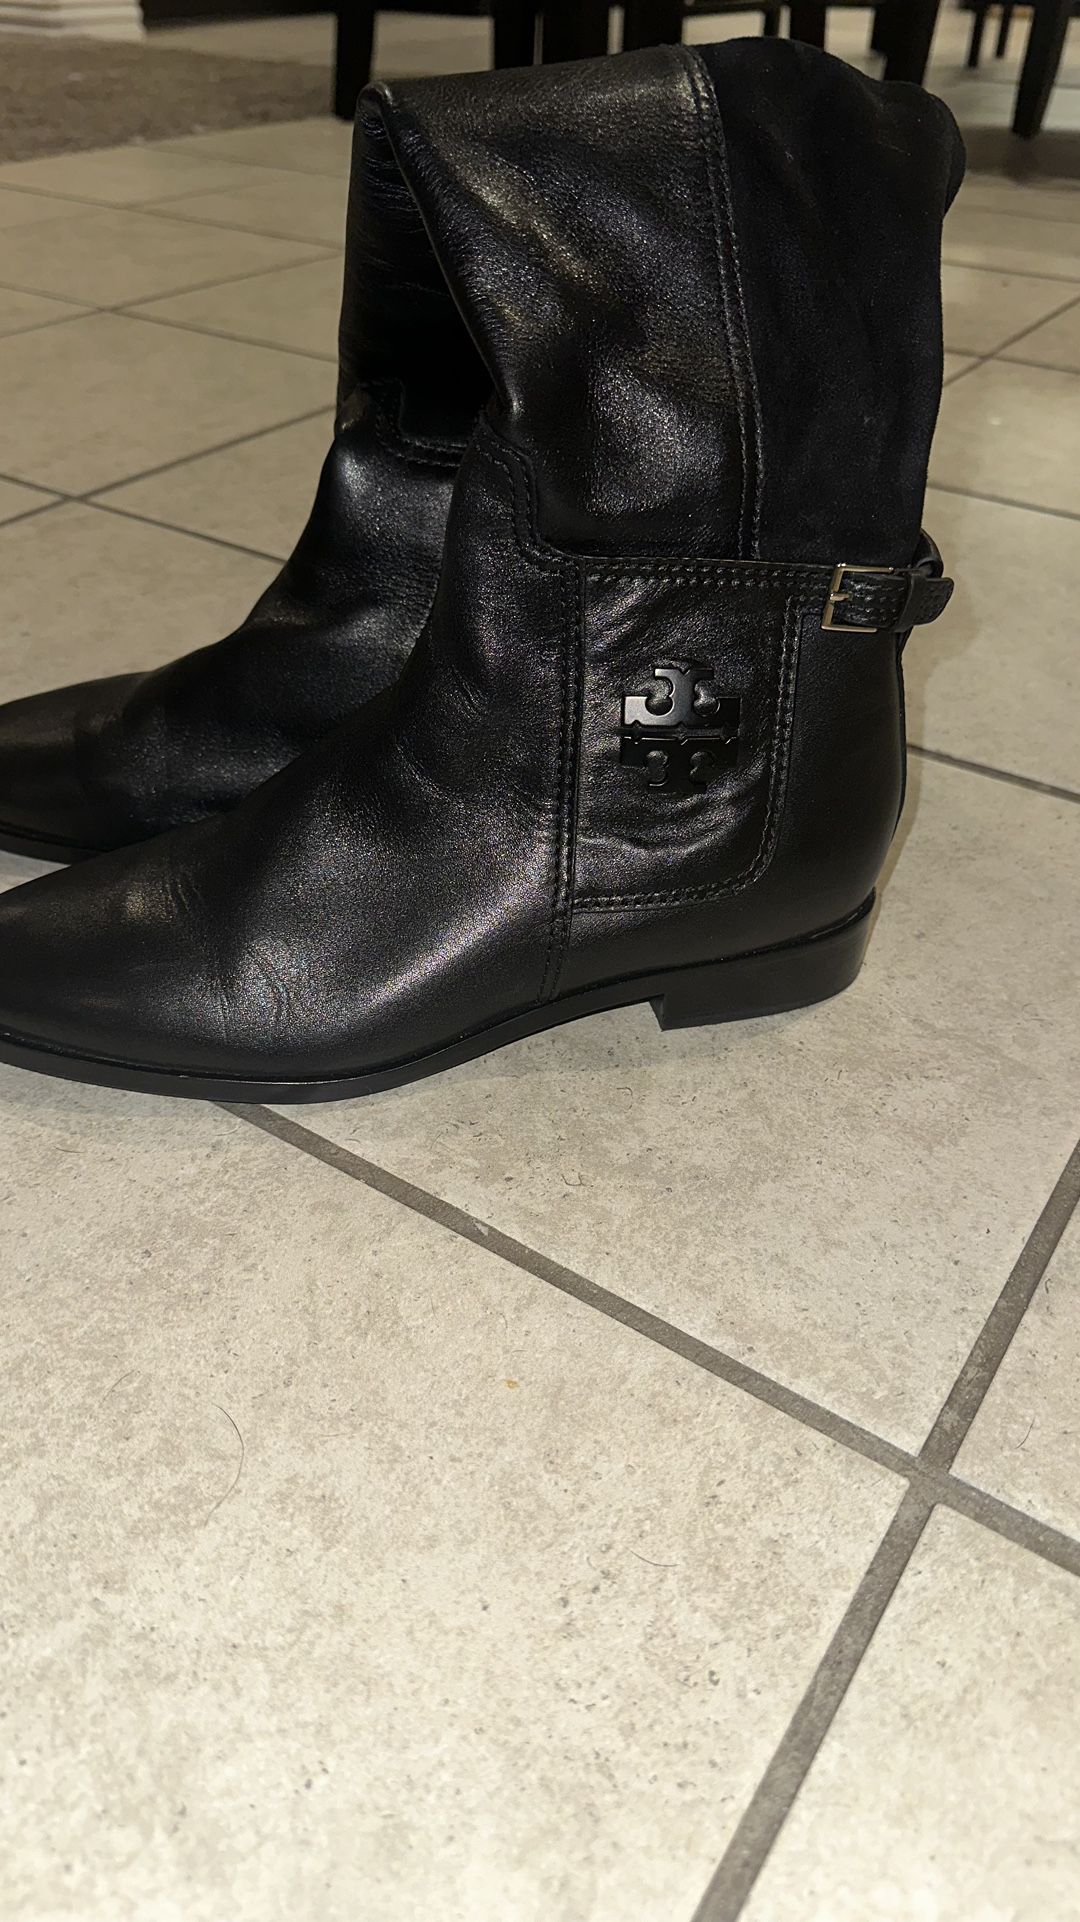 Tory Burch Leather Black Riding Boots Womens 10M